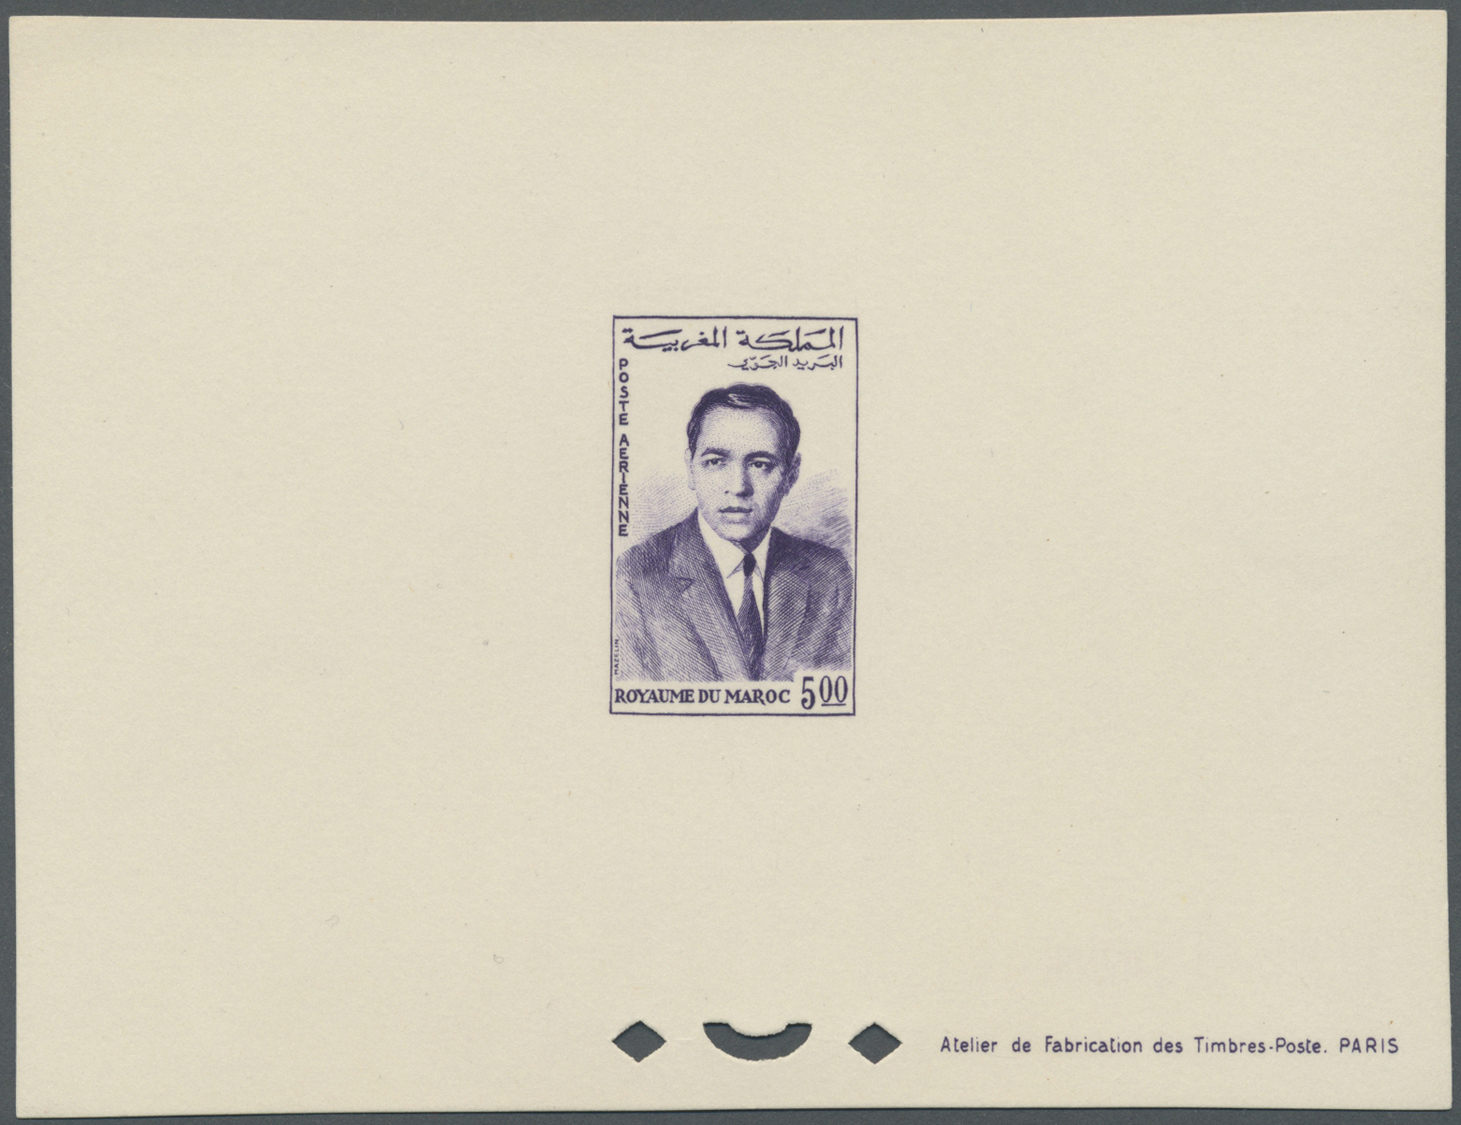 (*) Marokko: 1962, King Hassan II, 0.01dh. to 5.00dh., 13 values (issued on 14 Jun + 4 Oct 1962) as epreuve de luxe; in 